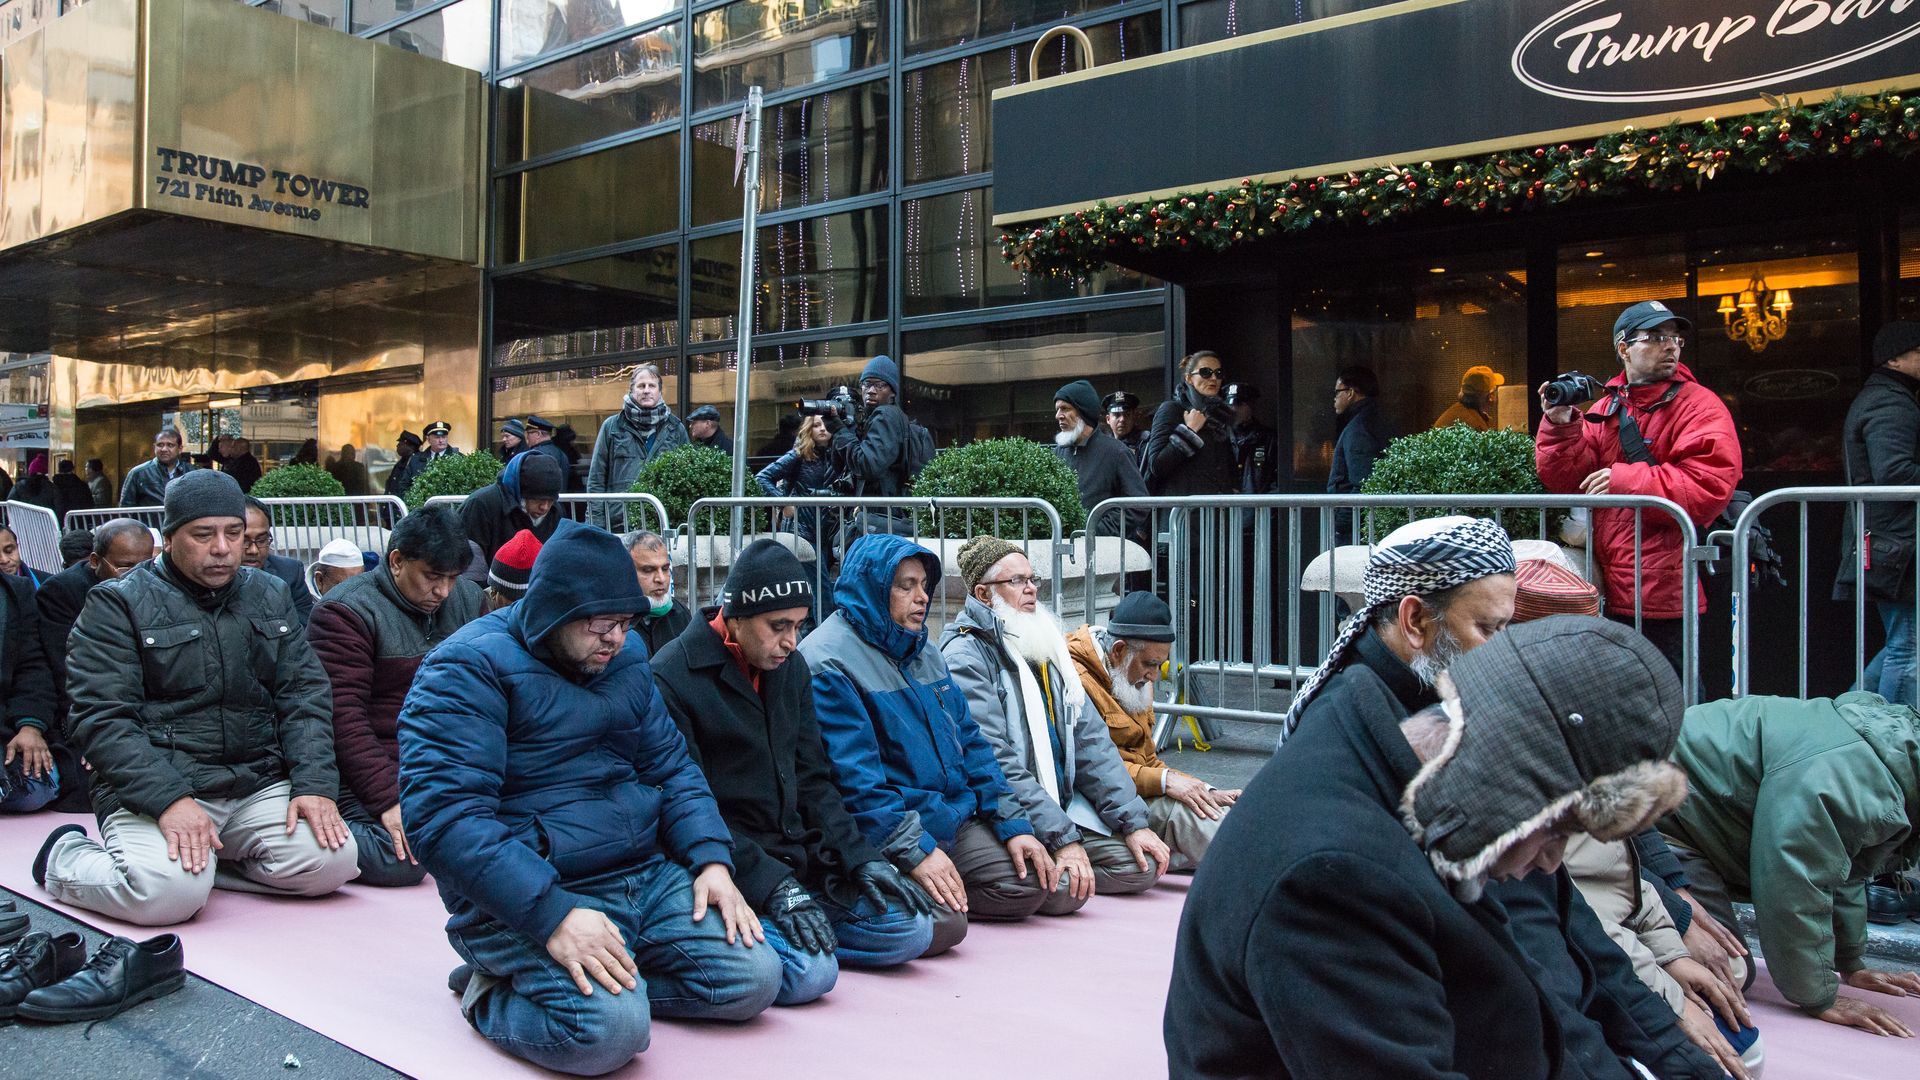 Muslim-Americans are seen protesting against Donald Trump in 2015.